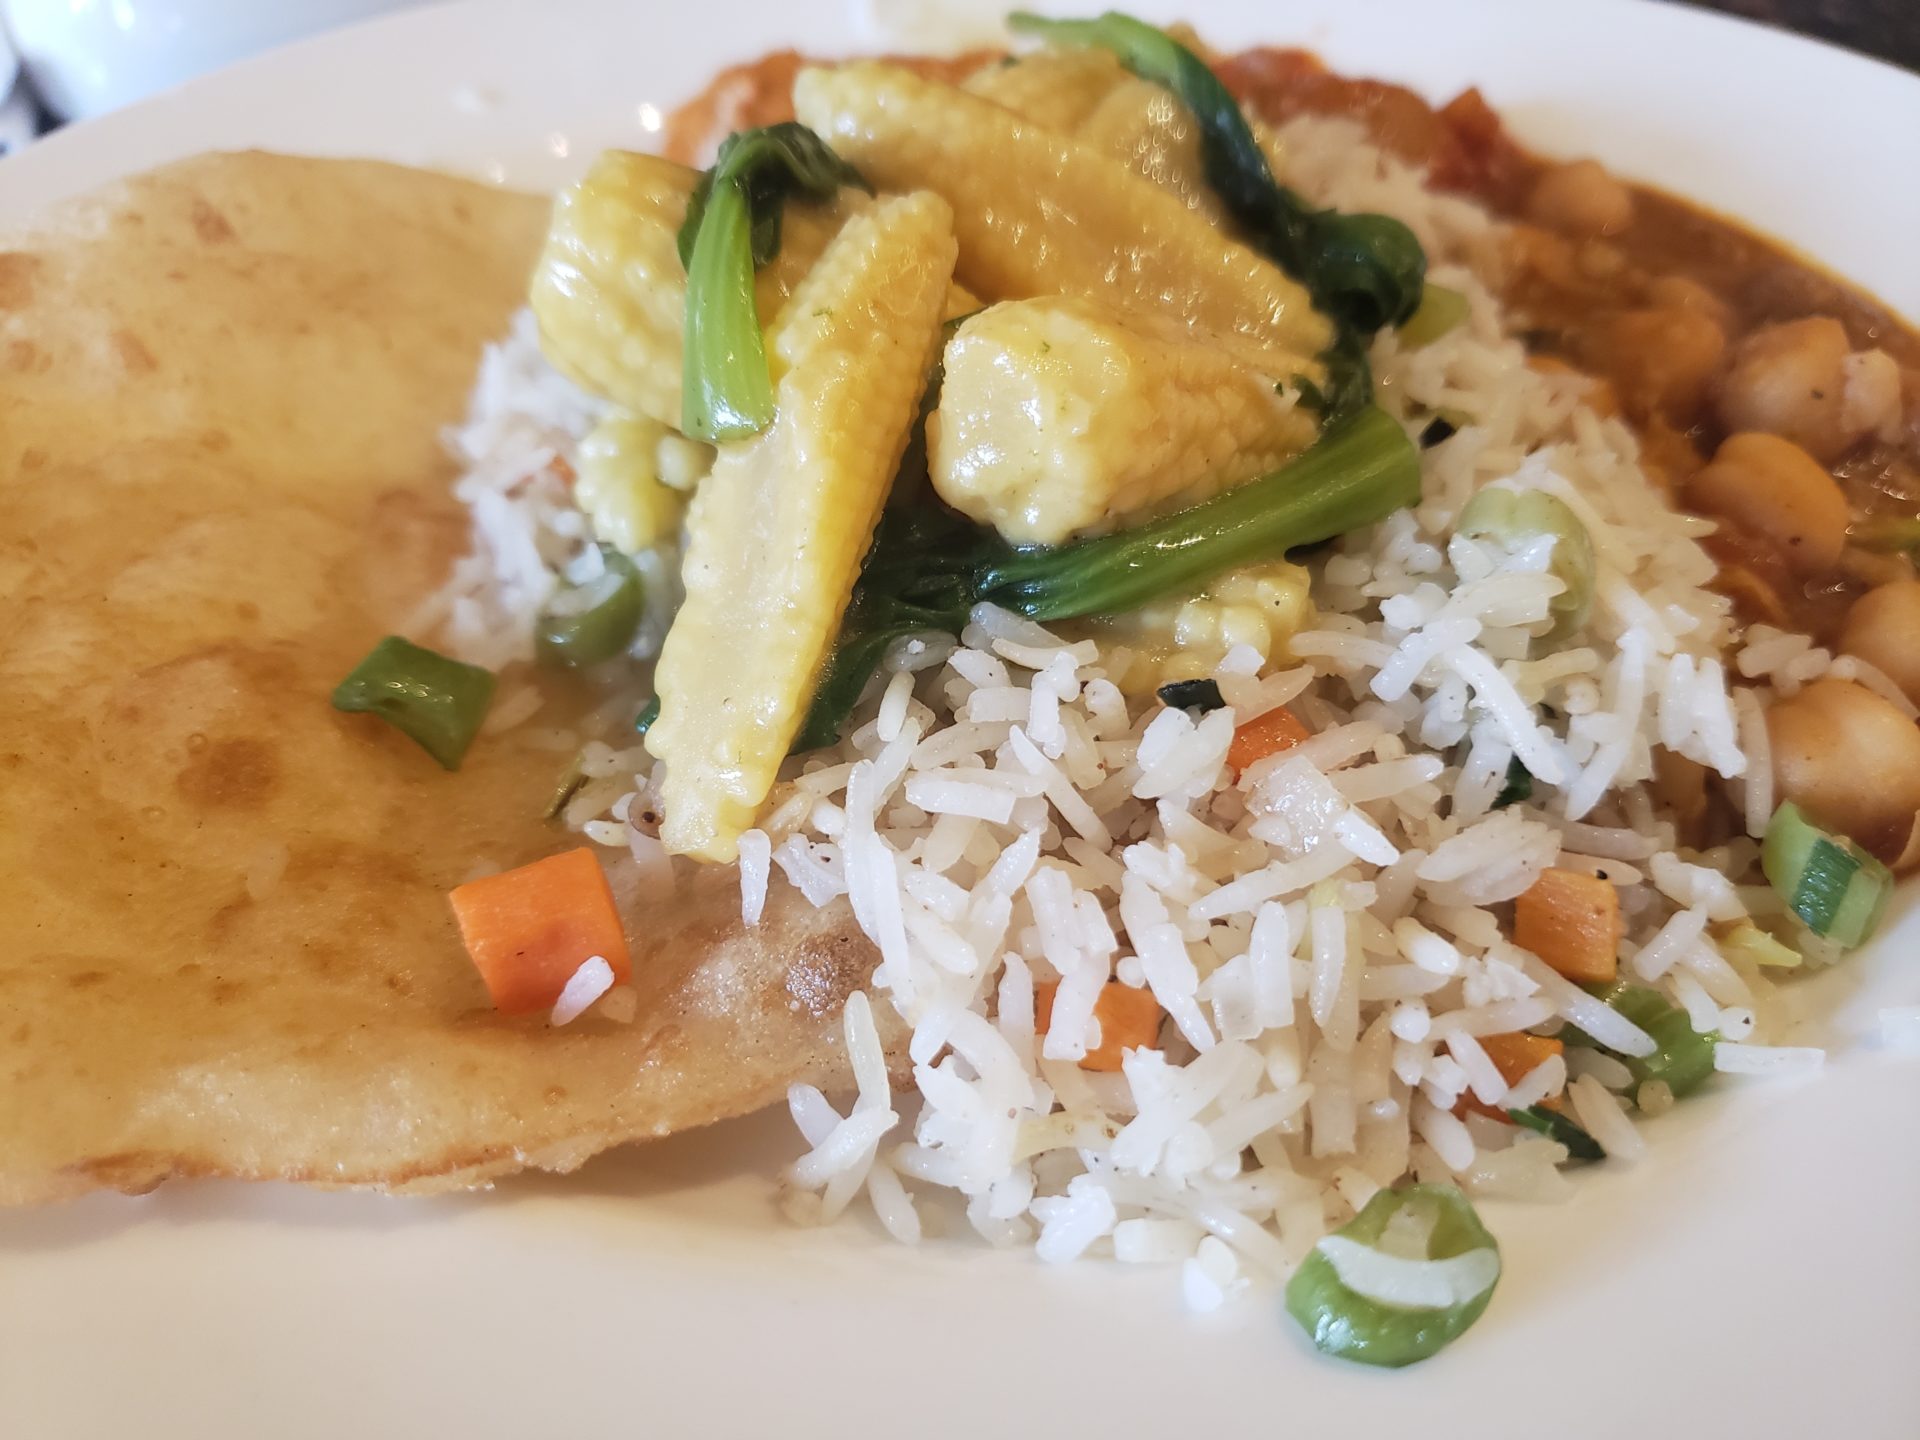 a plate of food with rice and vegetables